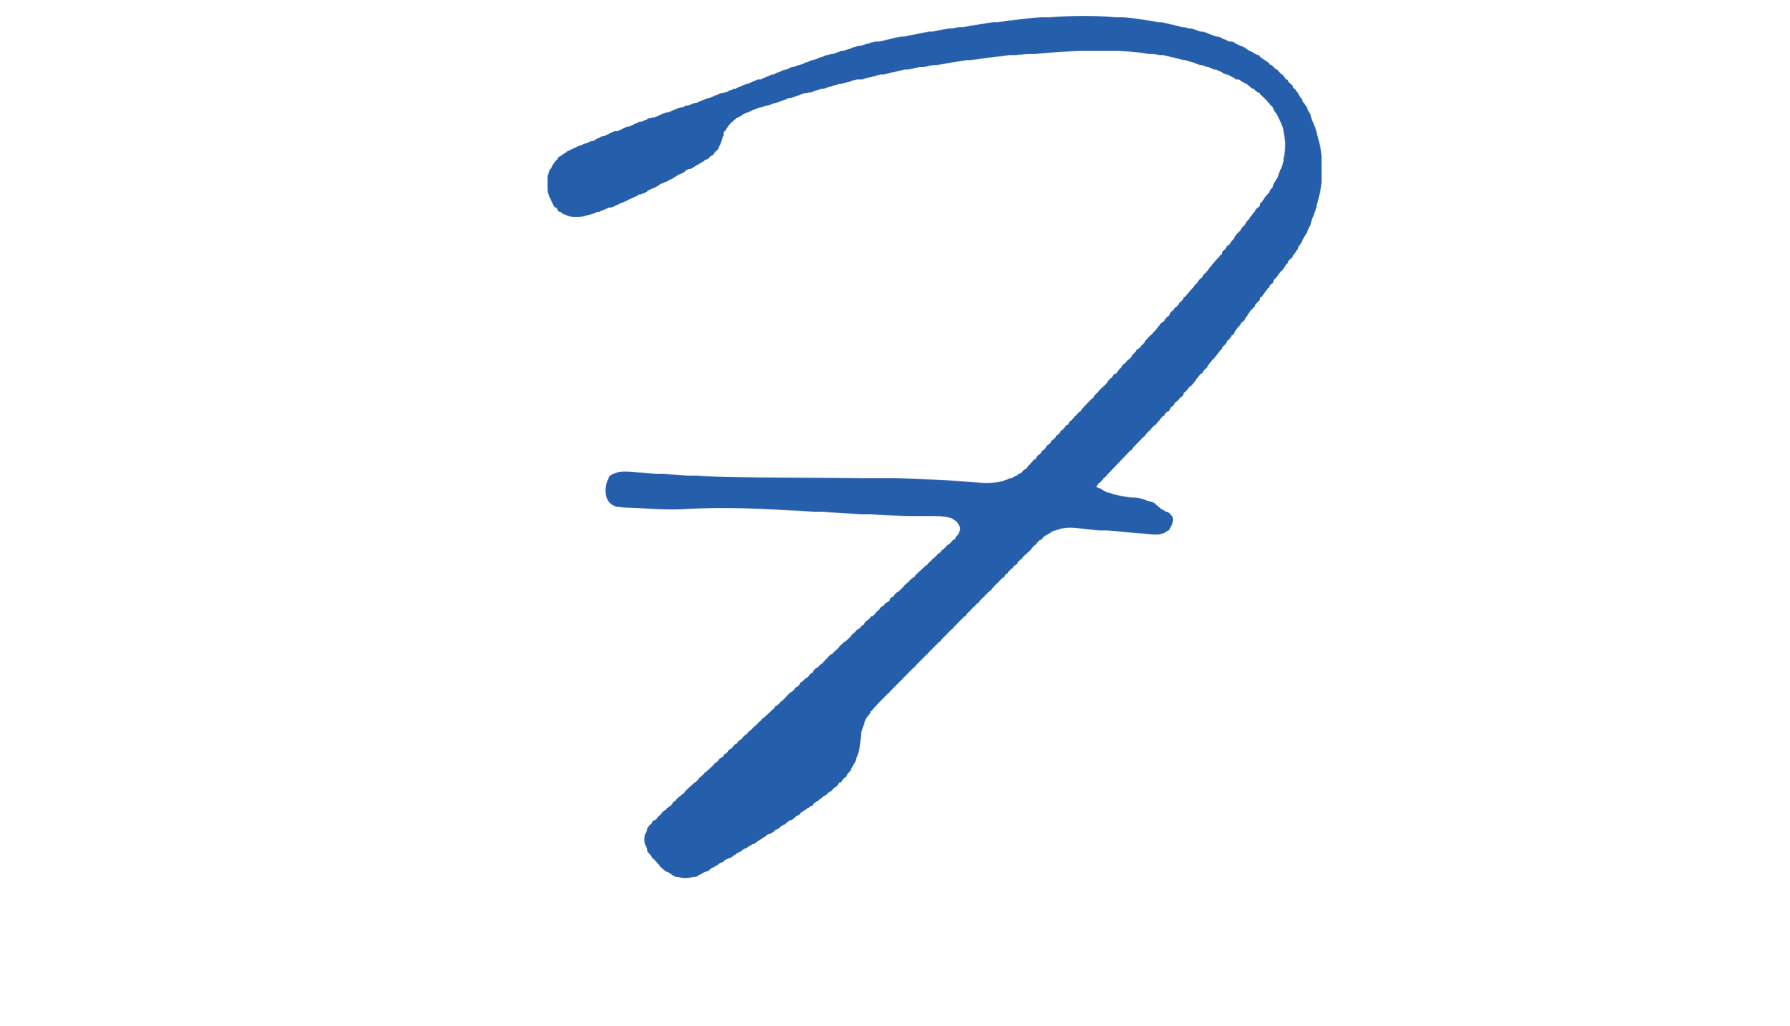 Fonville Law Firm PLLC